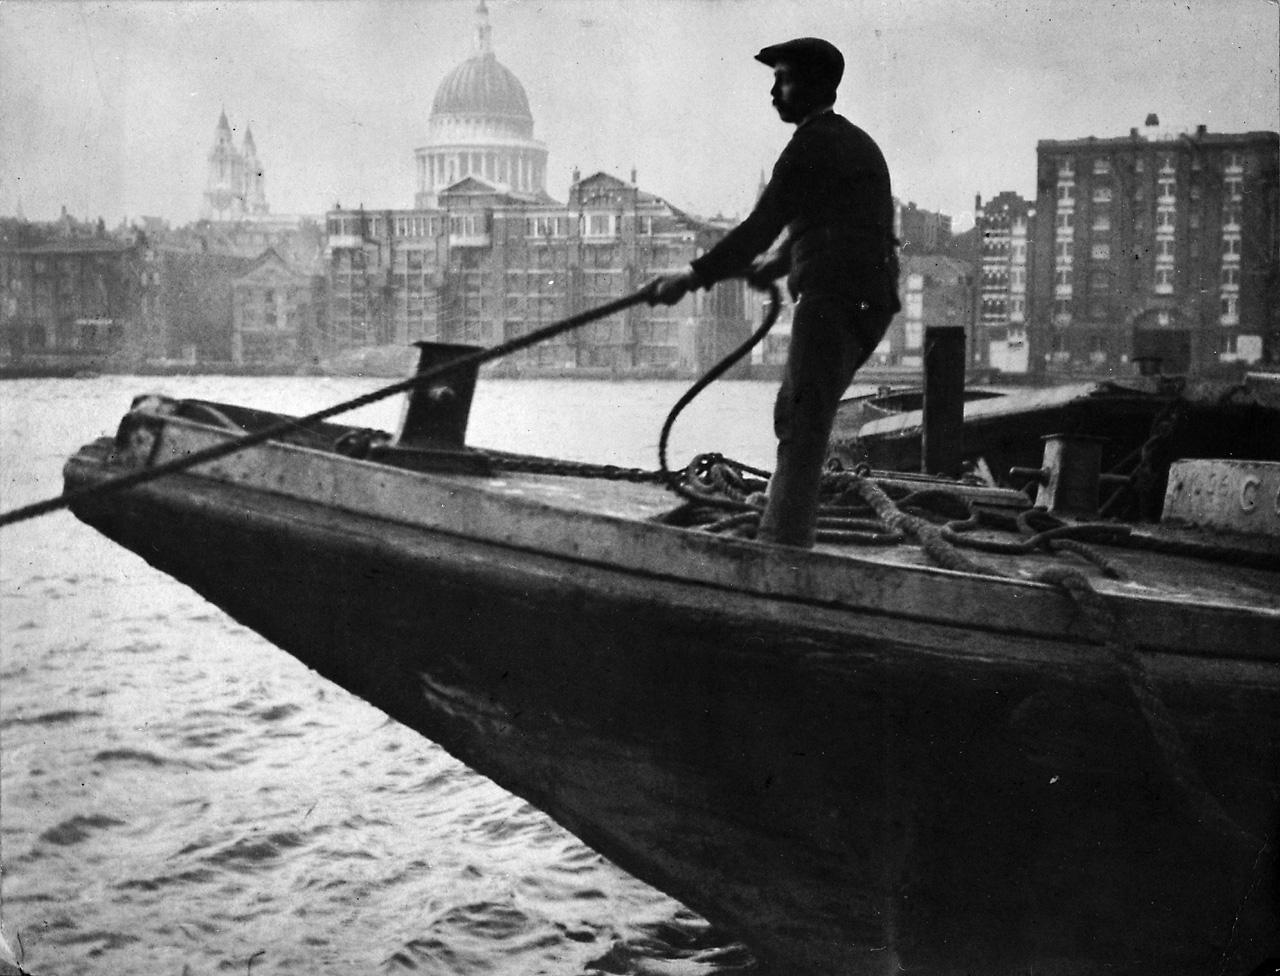 An image showing 'A lighterman standing on the bow of a lighter, hauling on a rope'